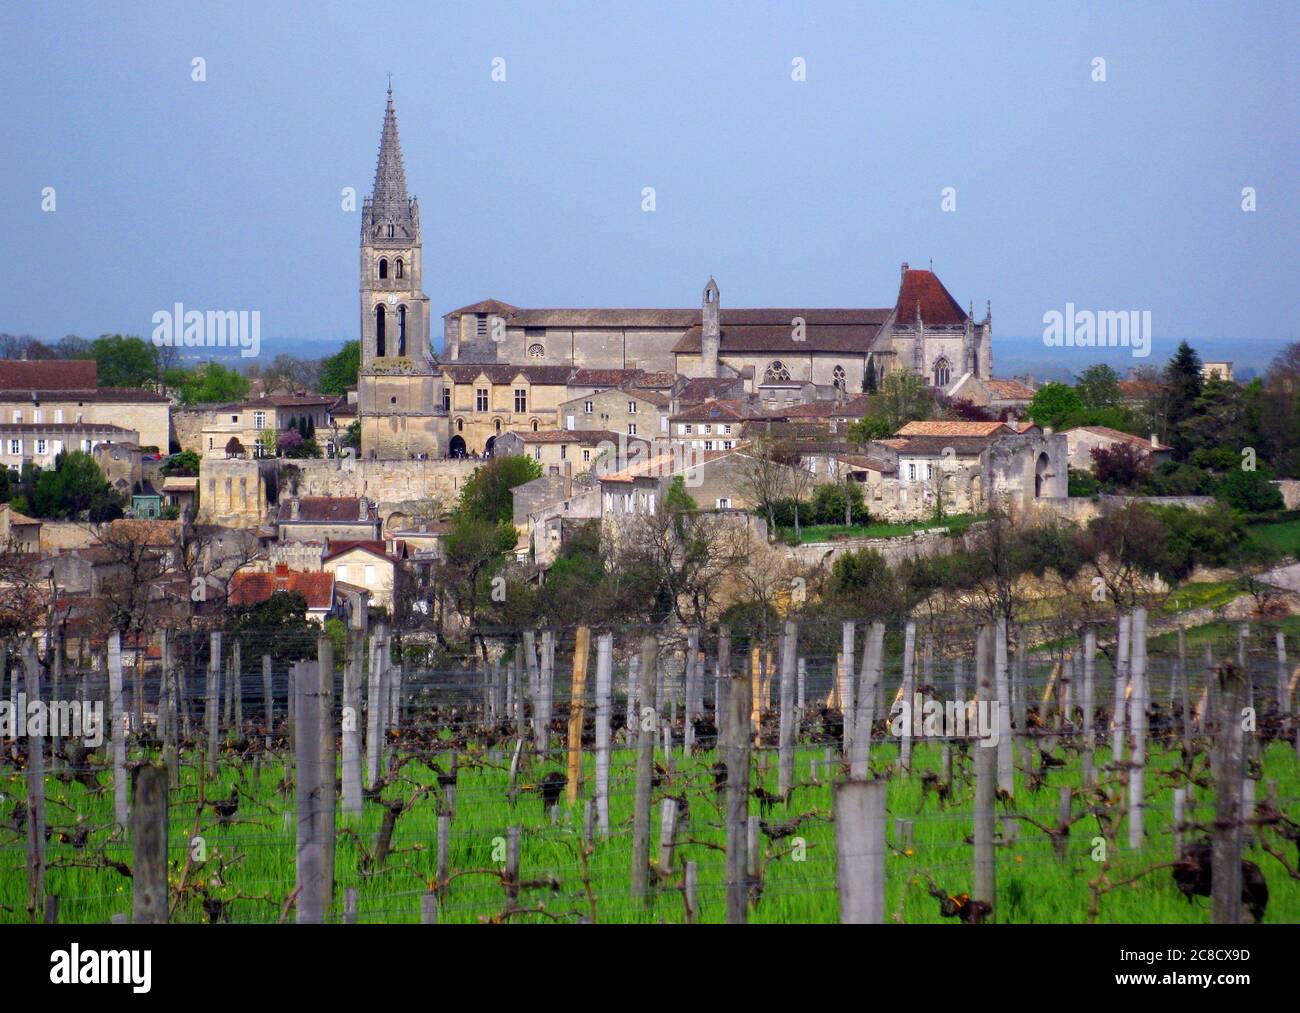 The village and vineyards of Saint-Émilion in France Stock Photo